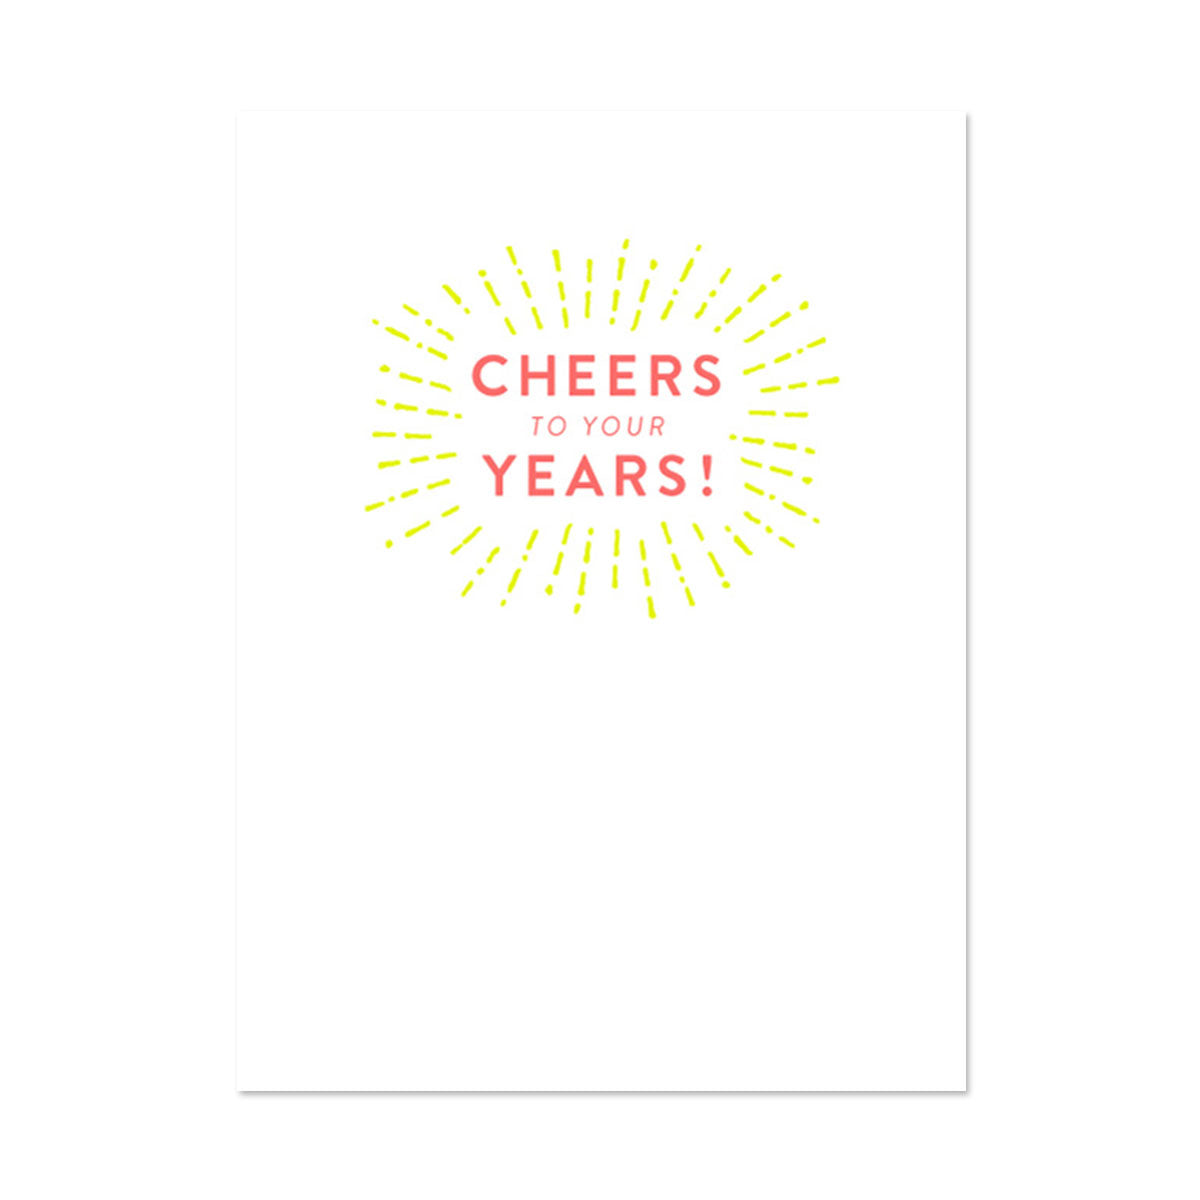 CHEERS TO YOUR YEARS BIRTHDAY CARD BY PAPER REBEL